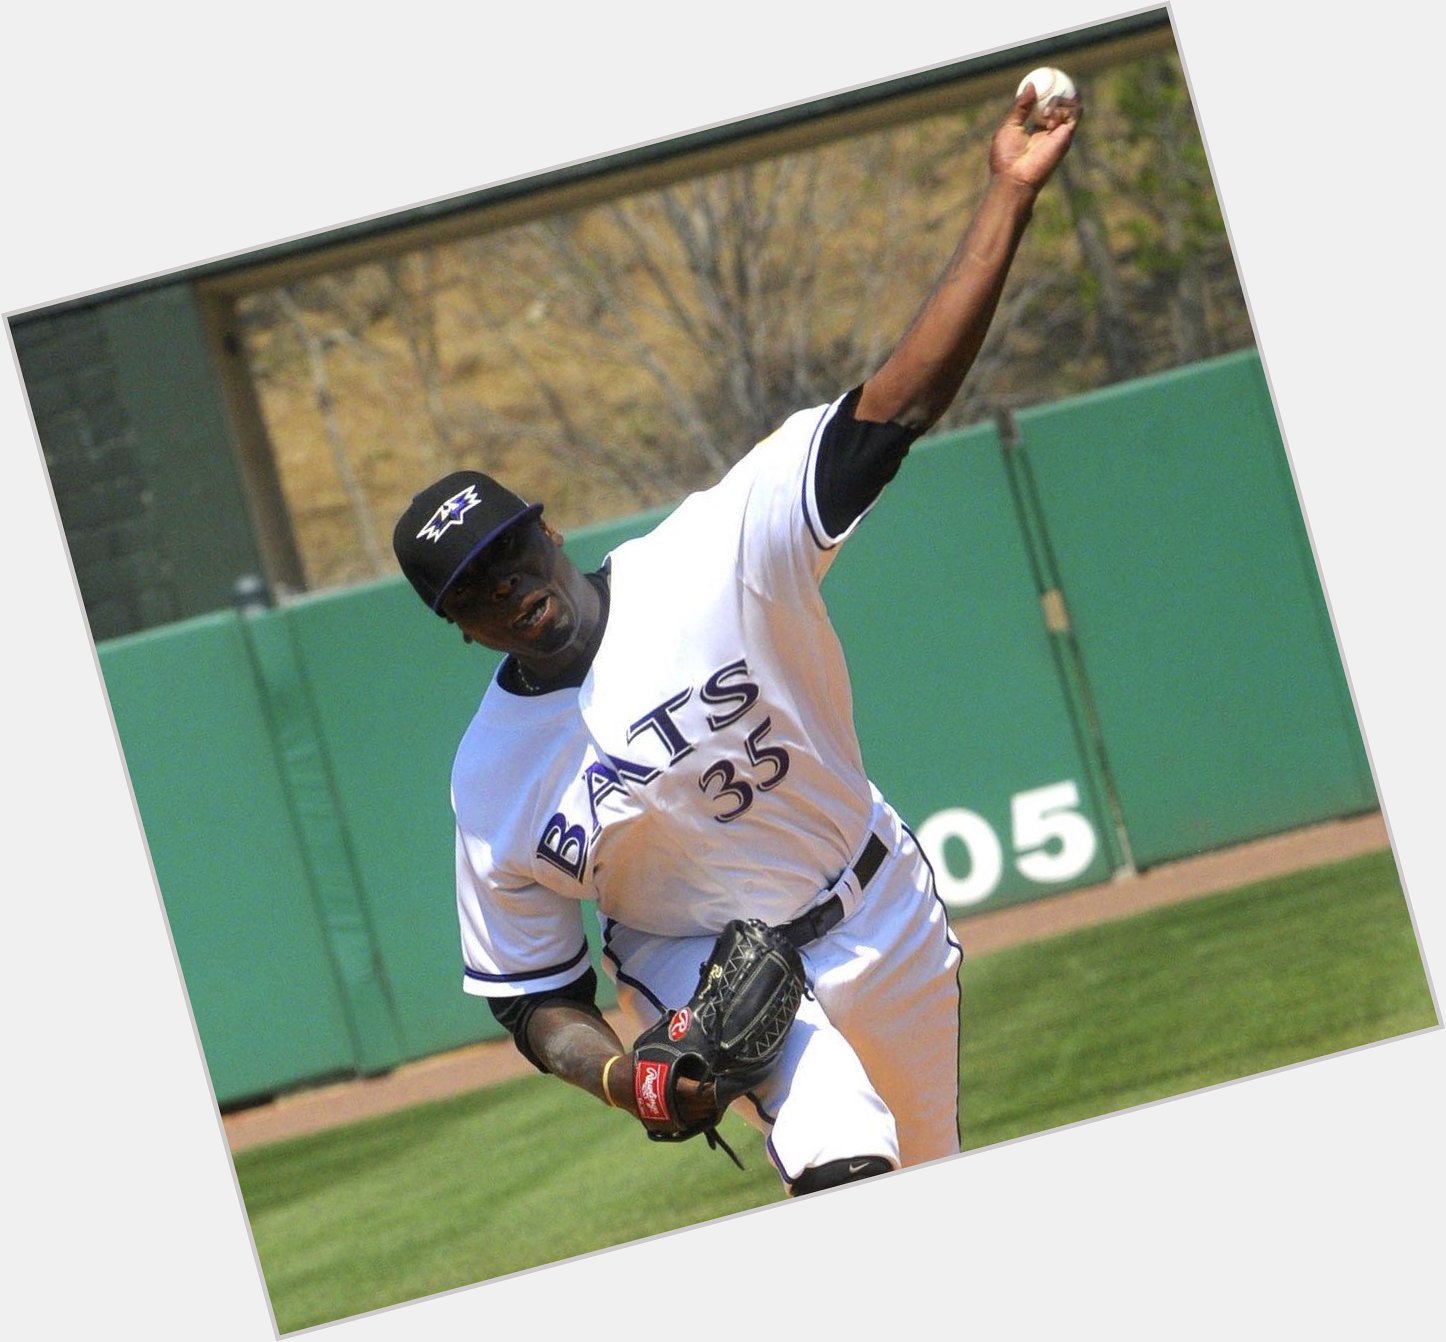 Today we send our Happy Birthday wishes to former Bat, Dontrelle Willis! 